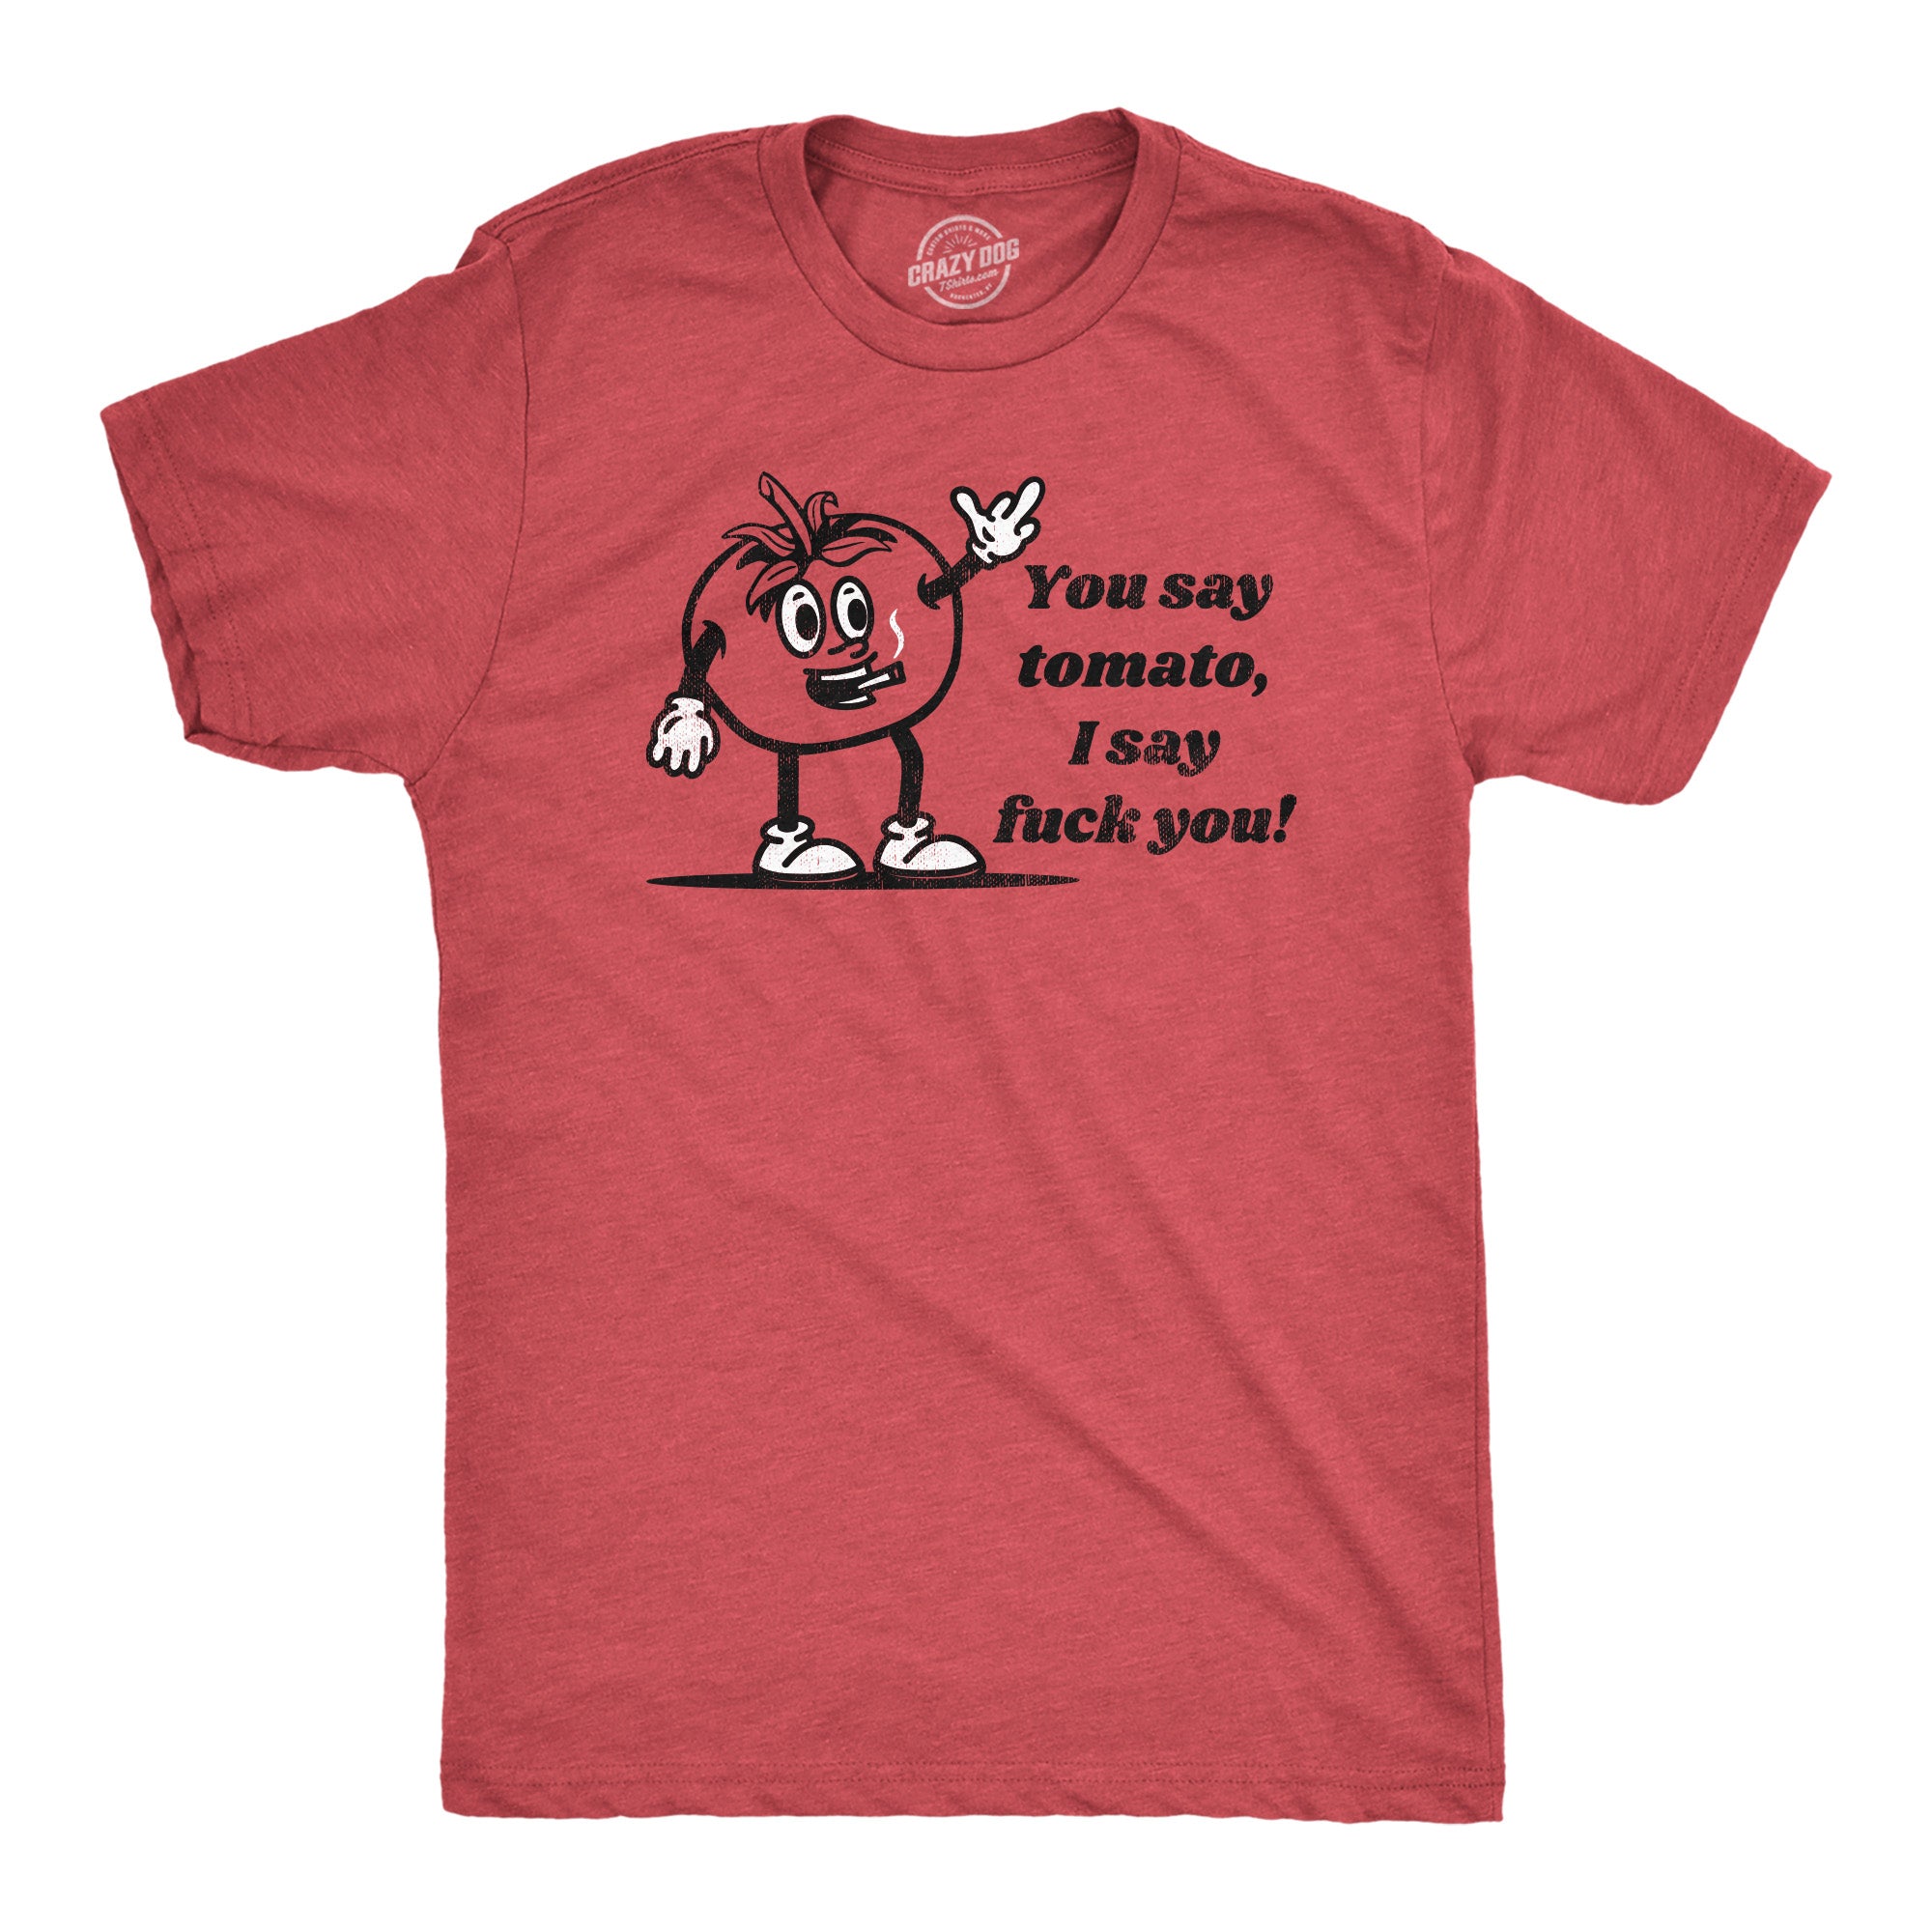 Funny Heather Red - You Say Tomato You Say Tomato I Say Fuck You Mens T Shirt Nerdy Food Sarcastic Tee